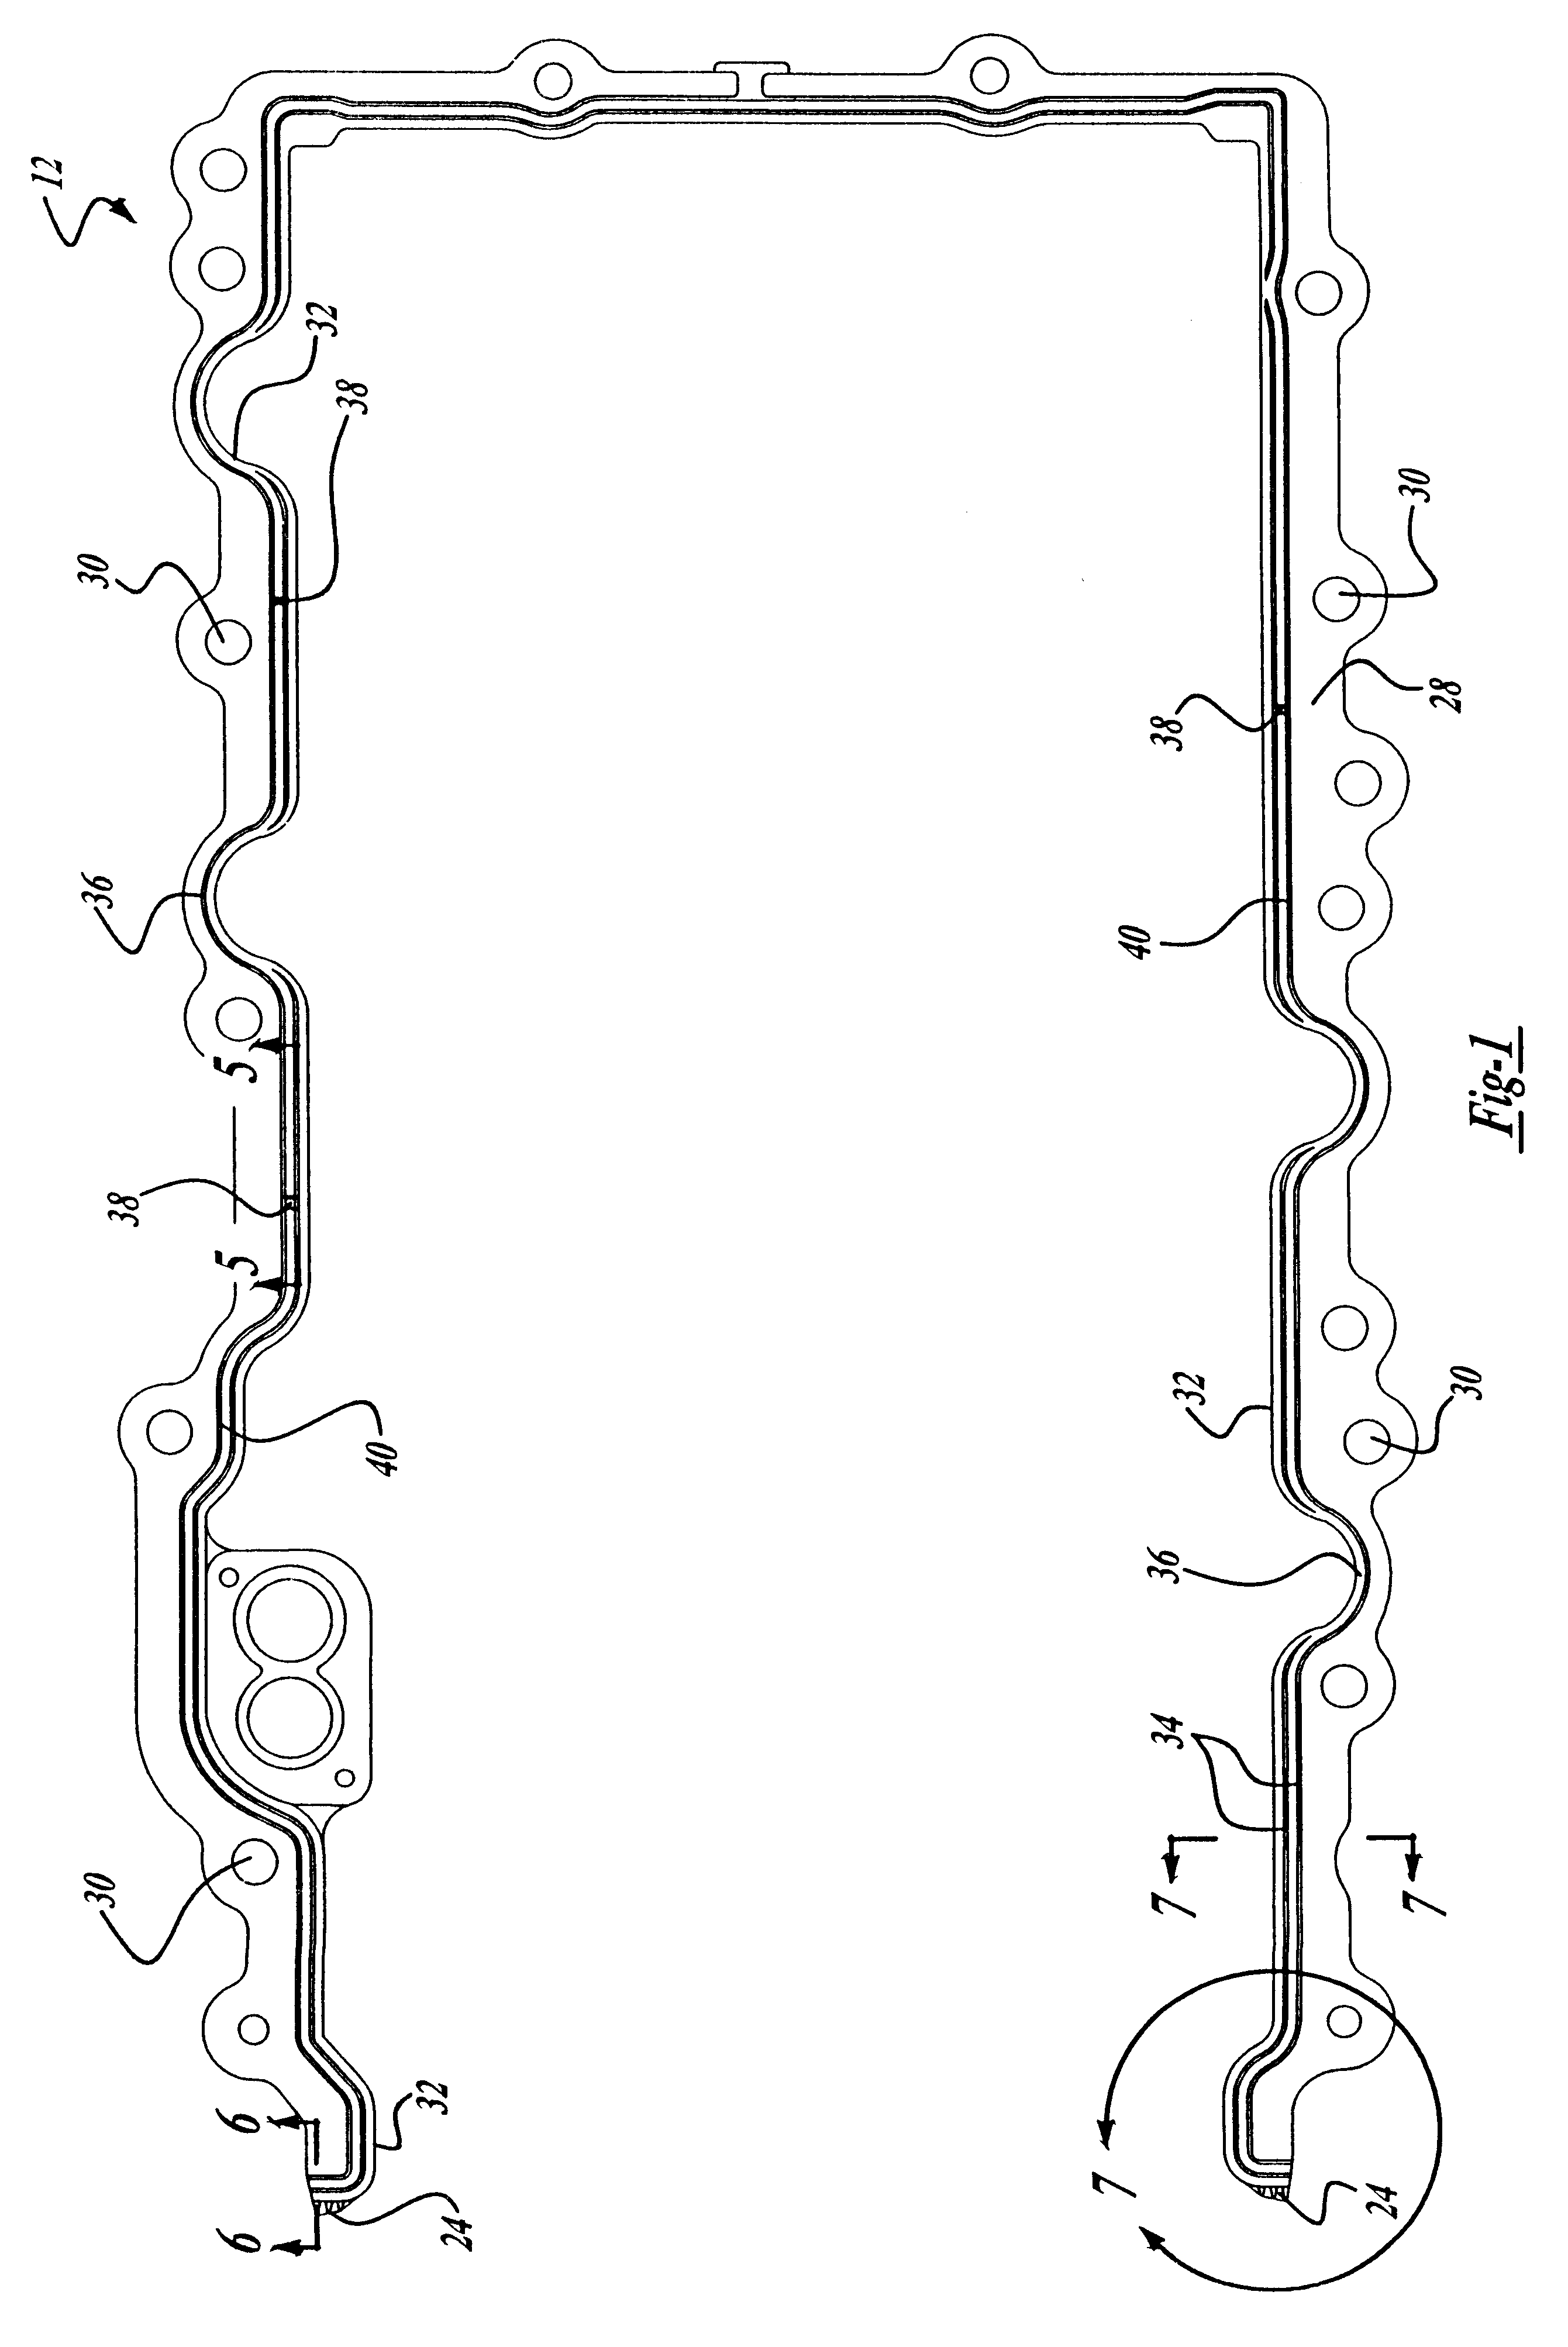 T-joint gasket assembly